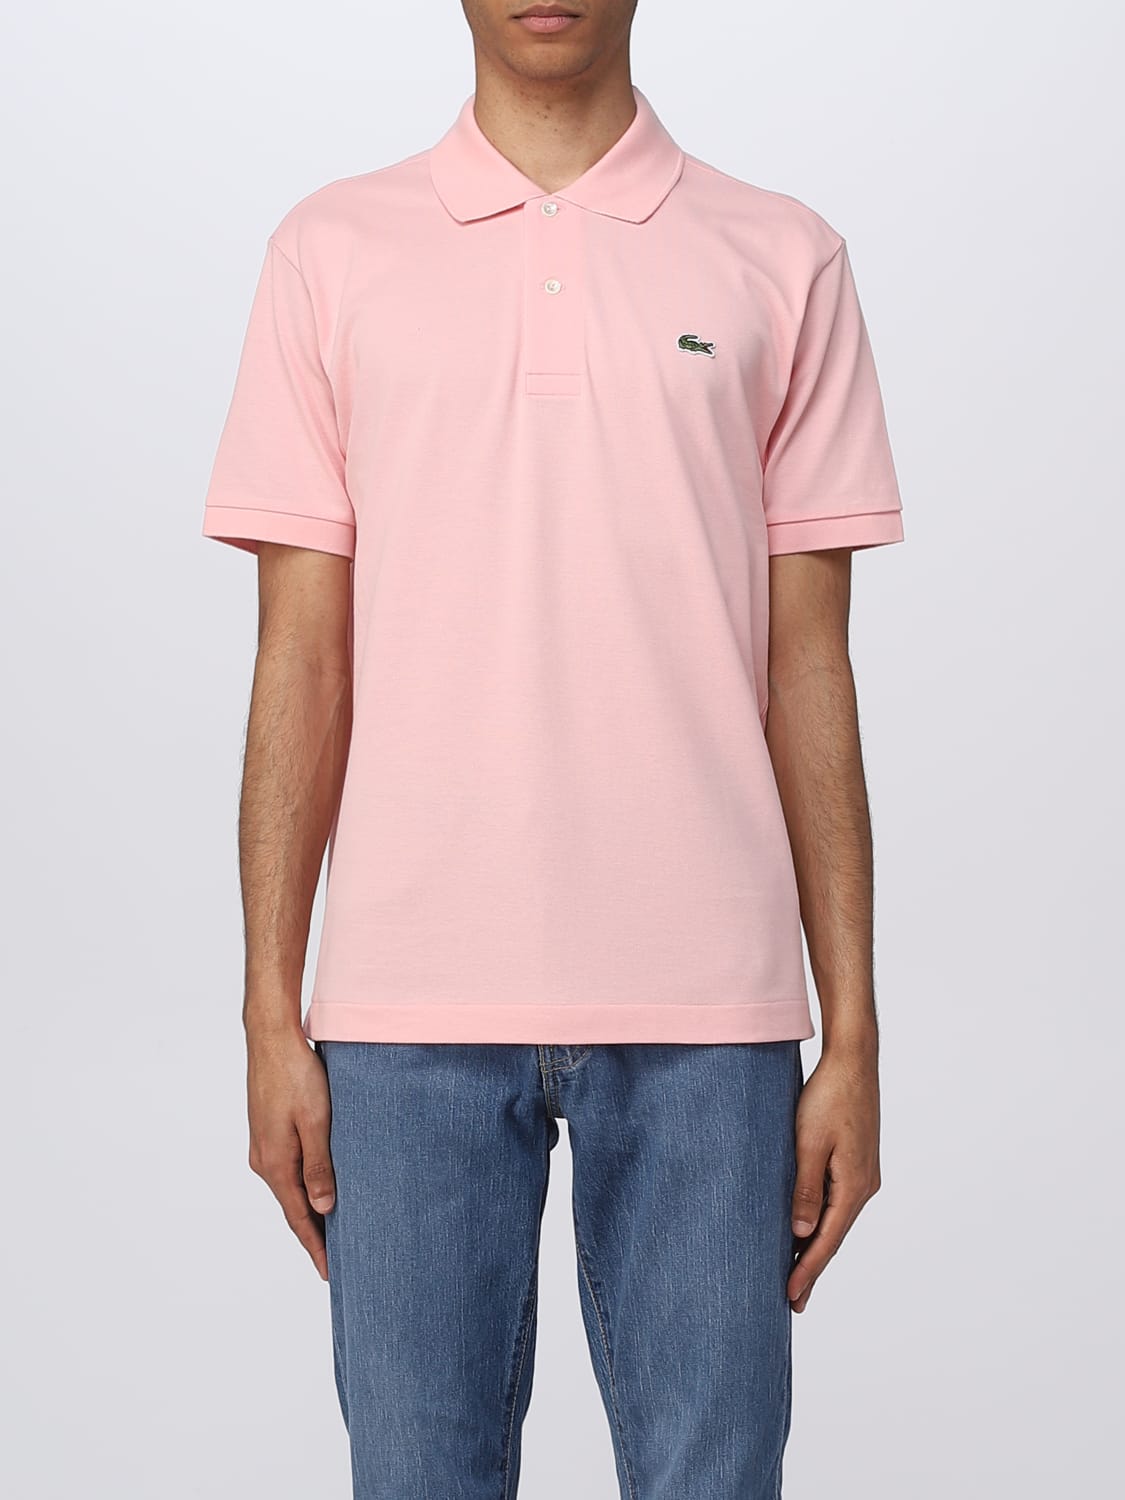 LACOSTE: polo shirt for - Blush Pink | Lacoste polo shirt L1212 online on GIGLIO.COM